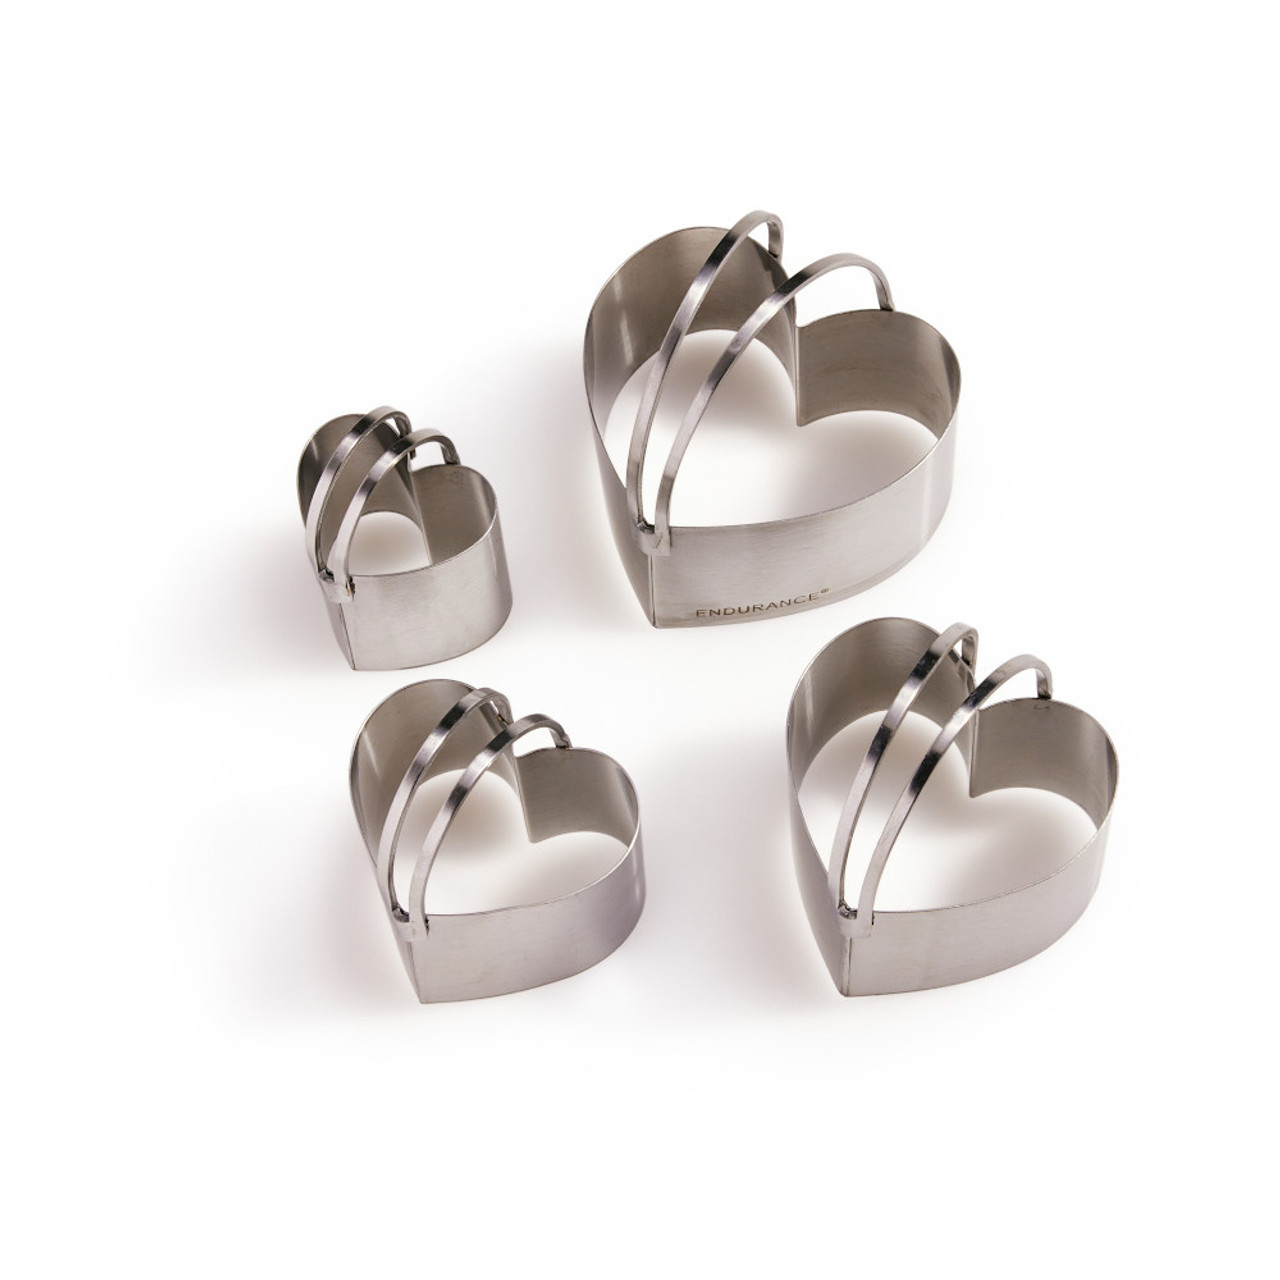 Heart Biscuit Cutters - King Arthur Baking Company